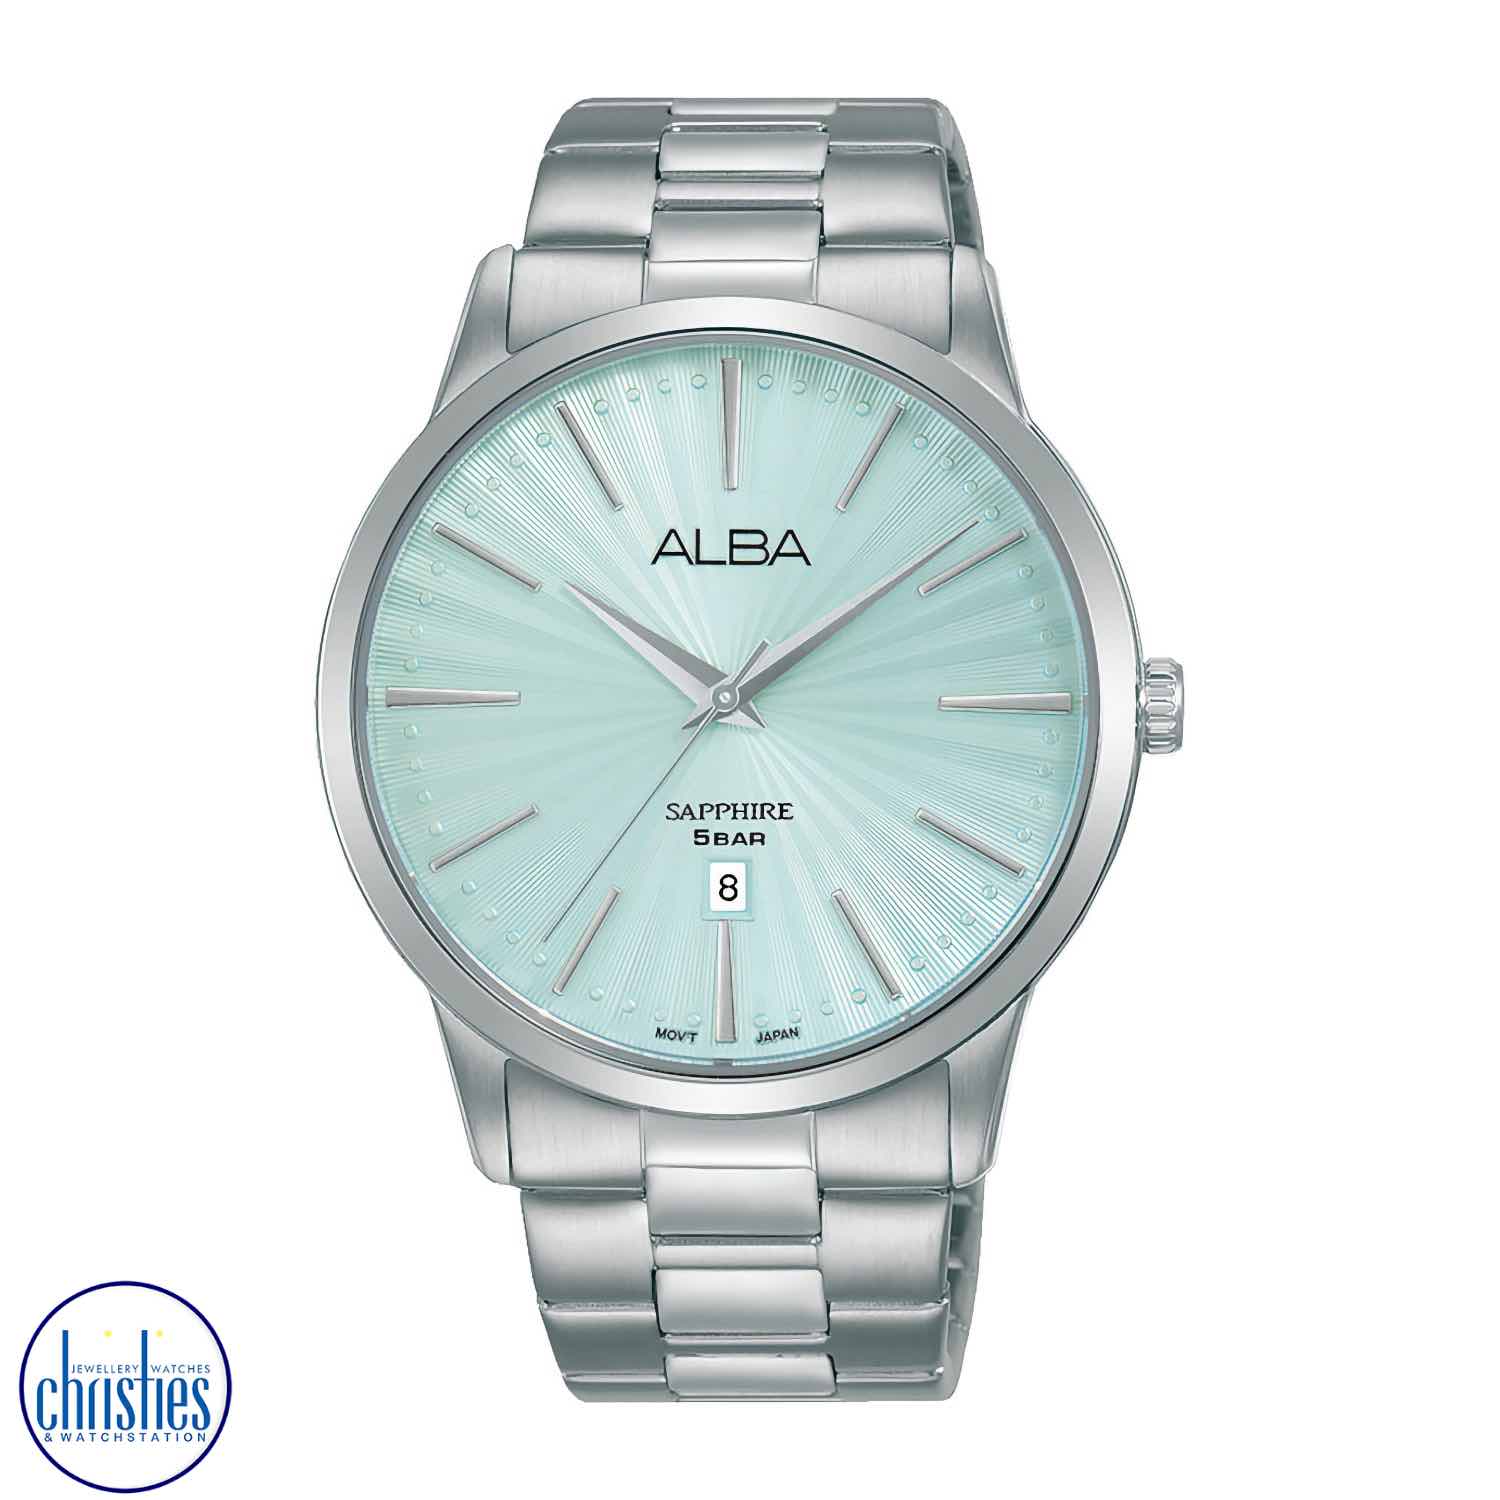 AG8L15X1 Alba Prestige Light Blue Patterned Dial  Analogue Dress Watch. unique engagement rings nz  Alba AG8L15X1 is an elegant, stylish men's analog watch that combines classic design and modern technology.